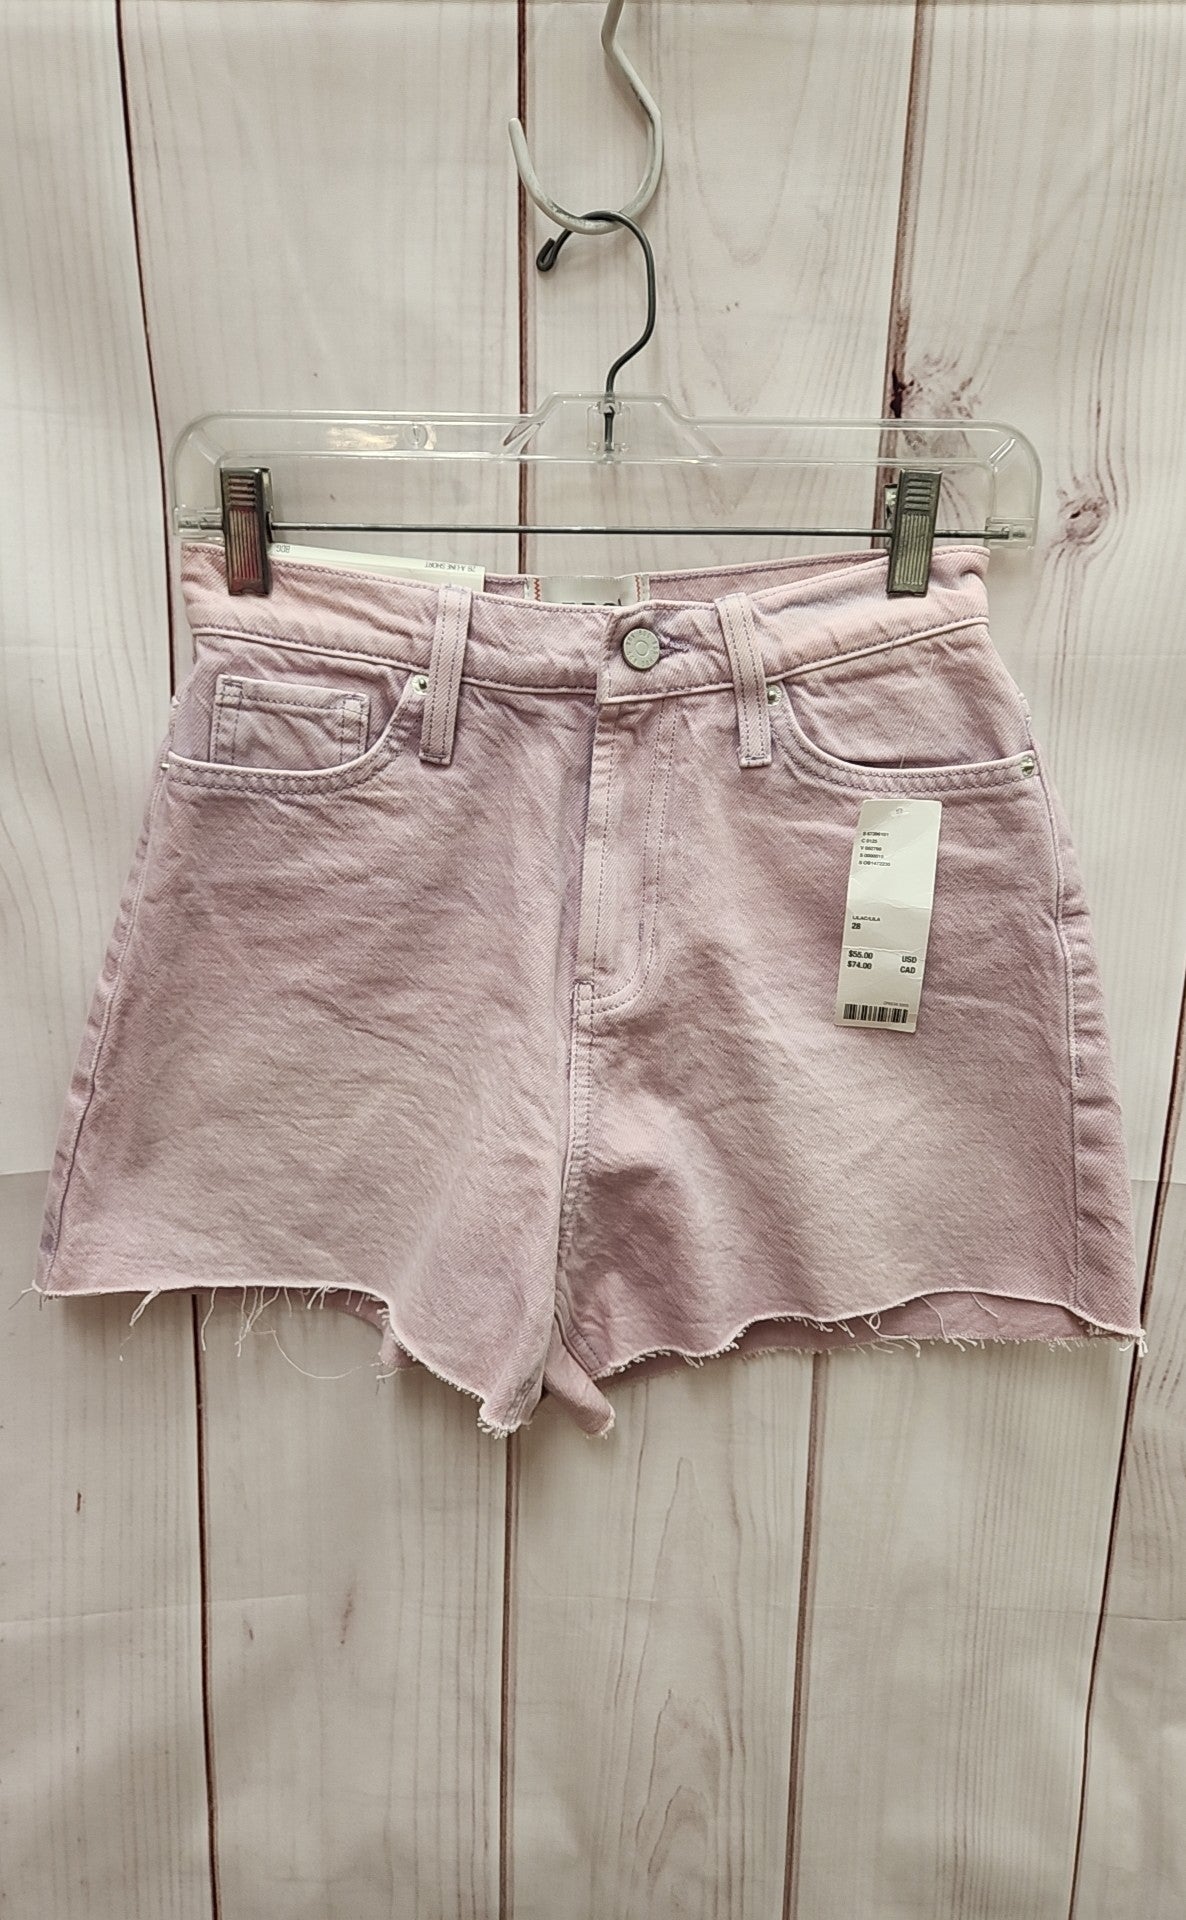 Bdg Women's Size 28 (5-6) A-Line Short Pink Shorts NWT